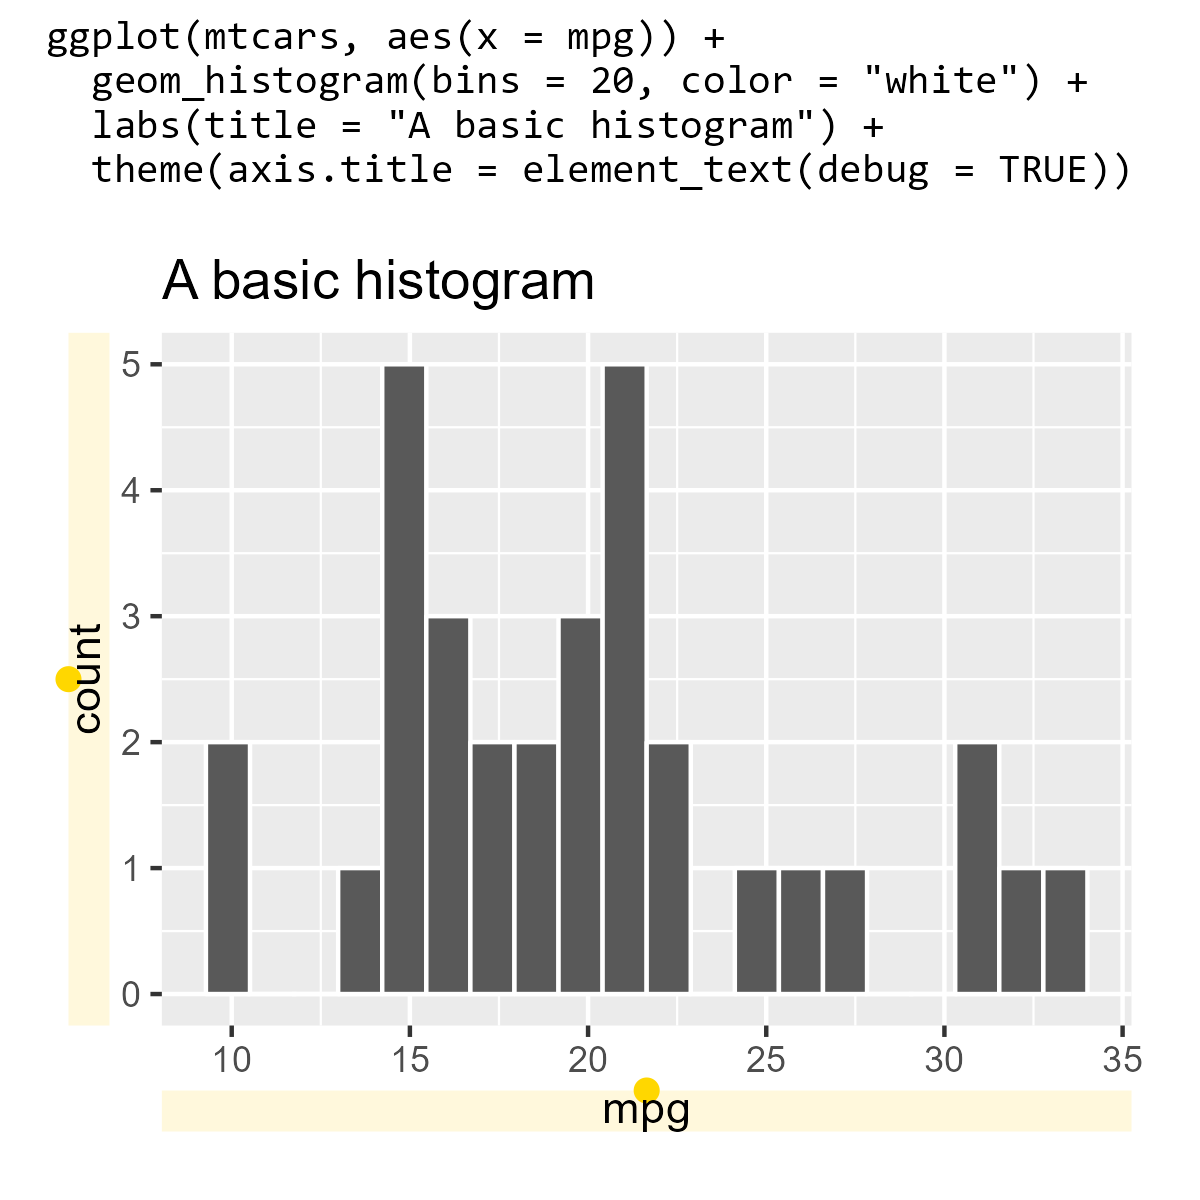 A ggplot2 plot of a histogram with the plotting code above the image. The plot theme includes yellow shading and points in the x and y axis titles.